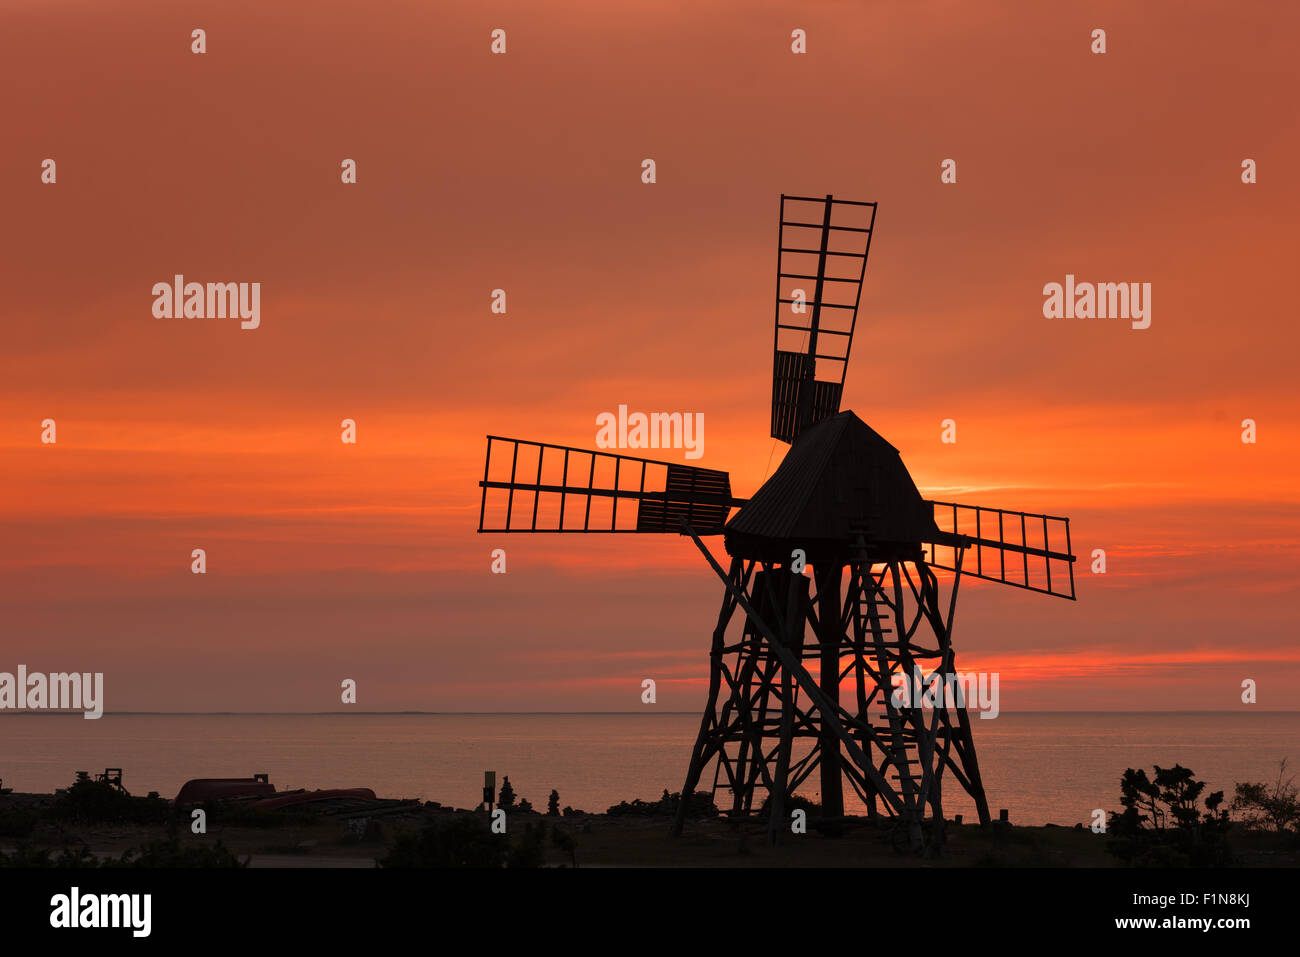 Old windmill on the island Oeland, Sweden Stock Photo